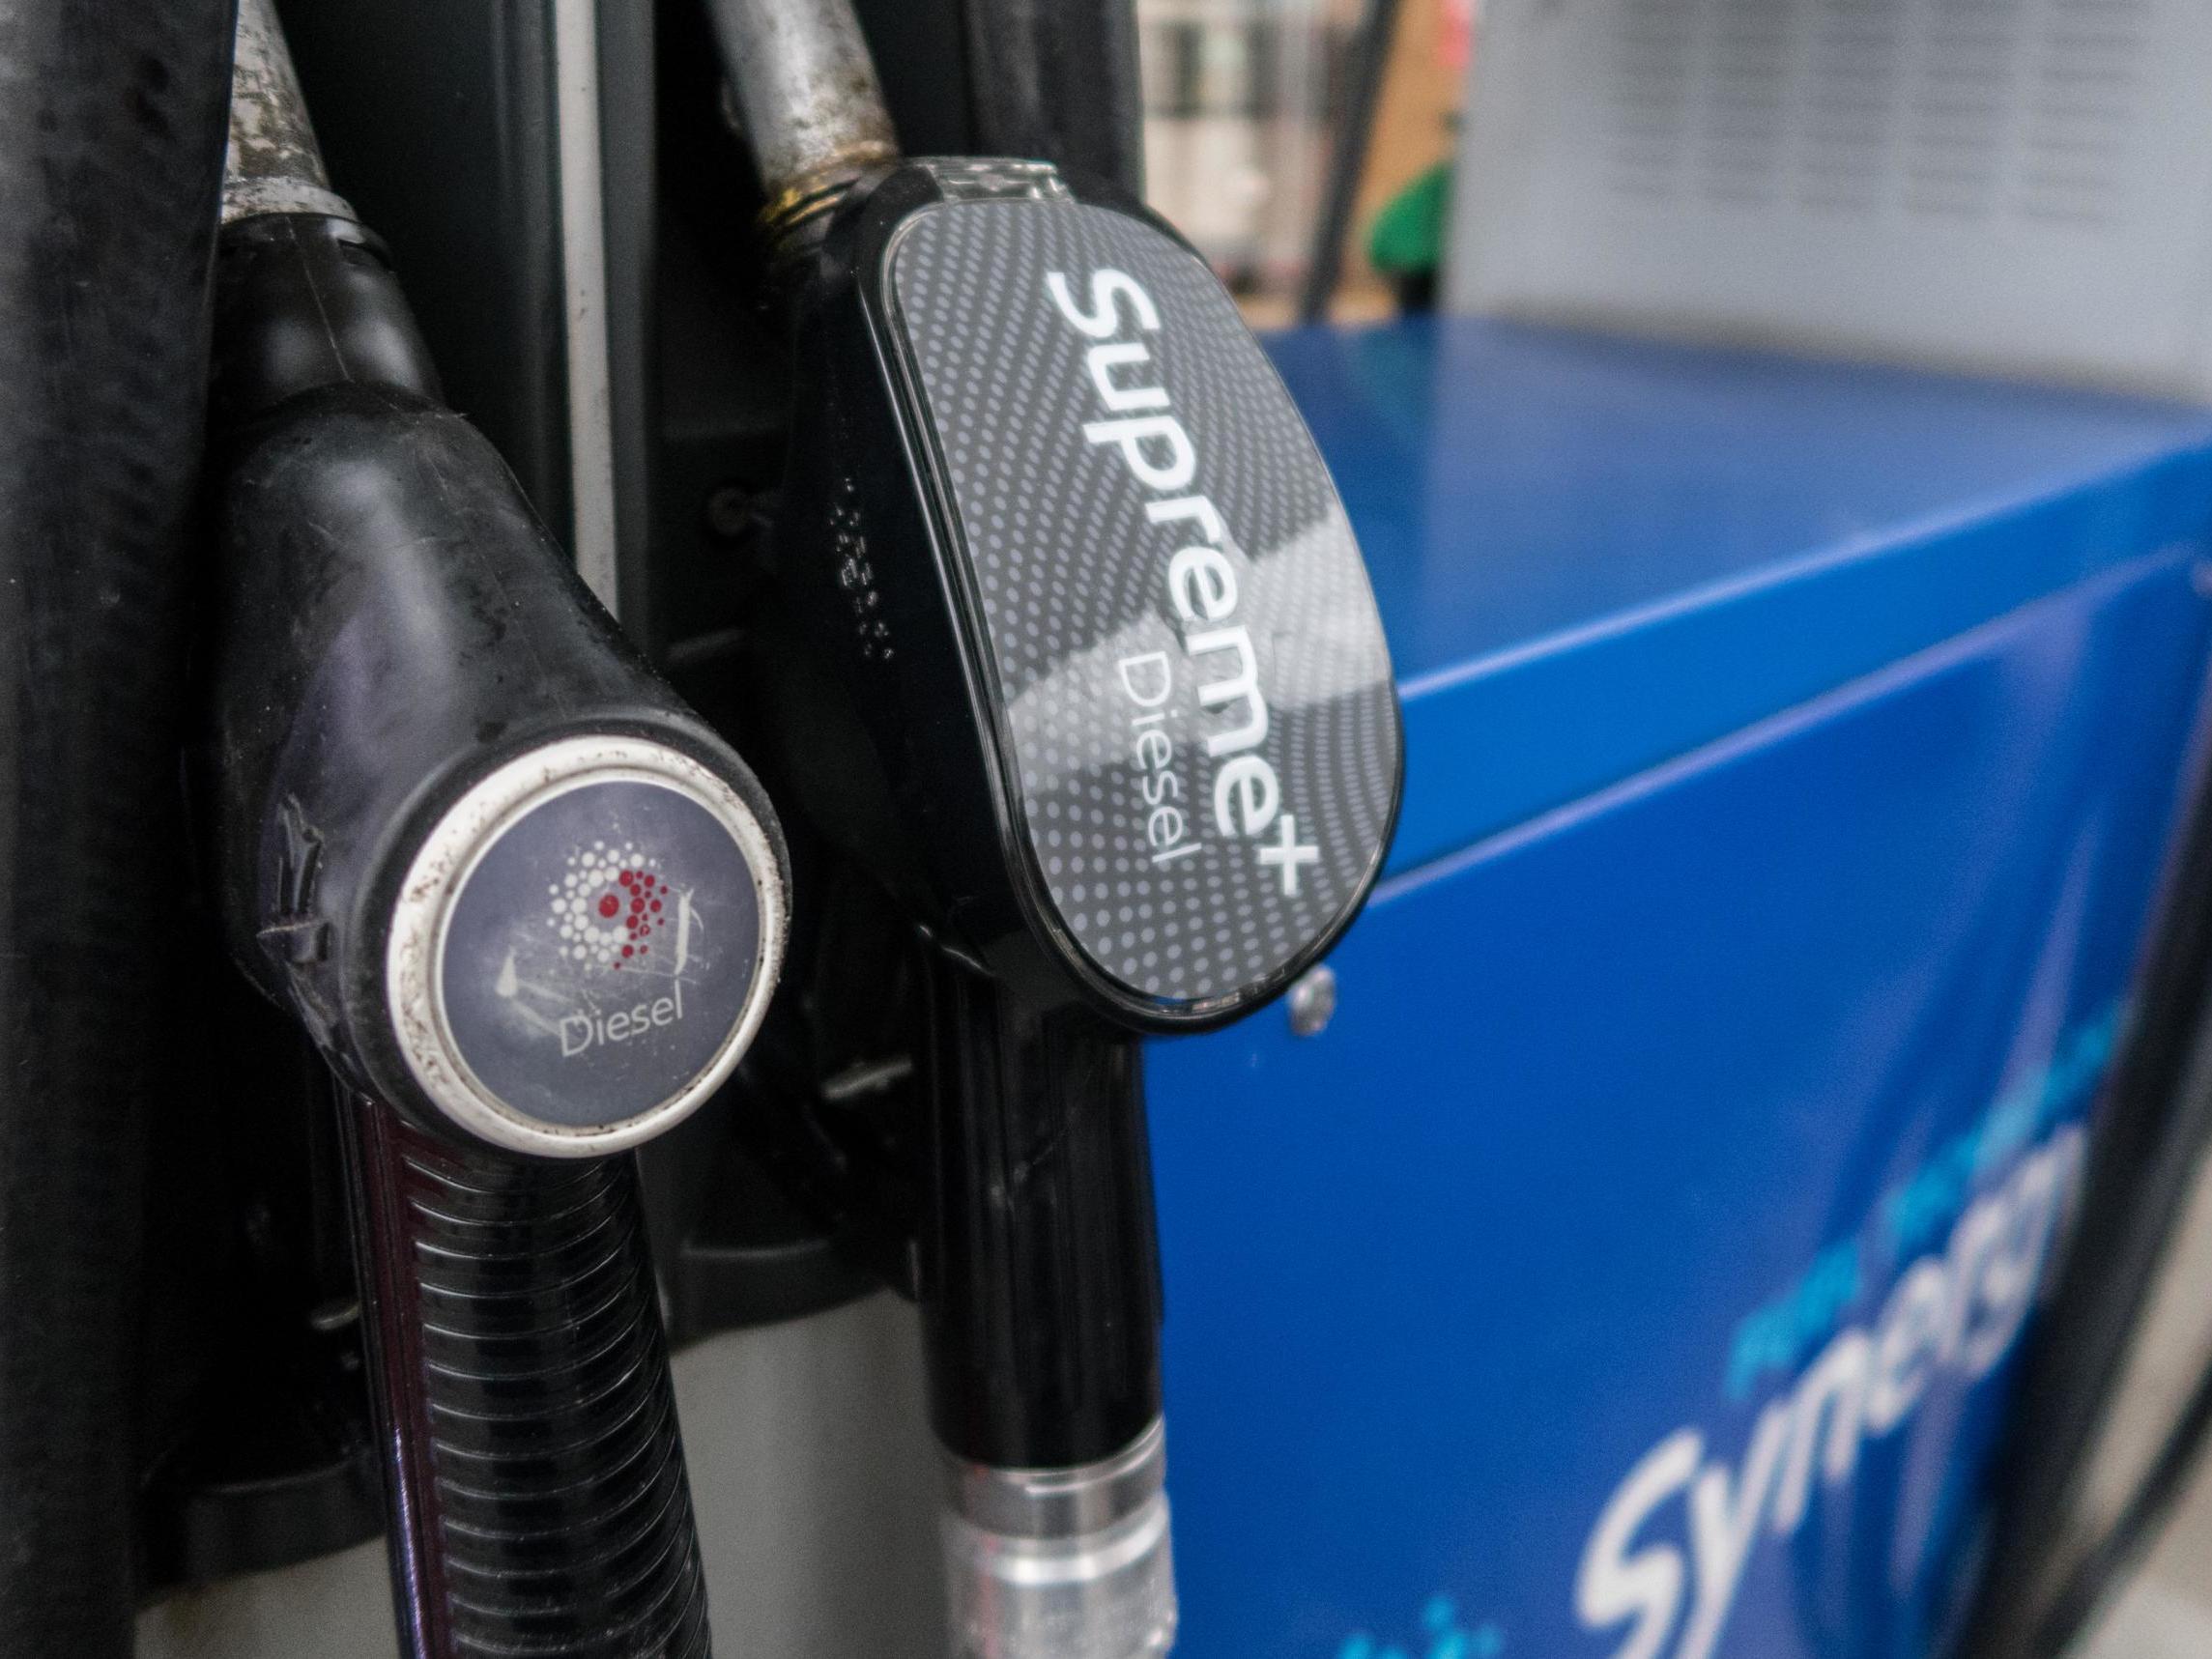 There are no rules on the mark-up that retailers can use when selling fuel